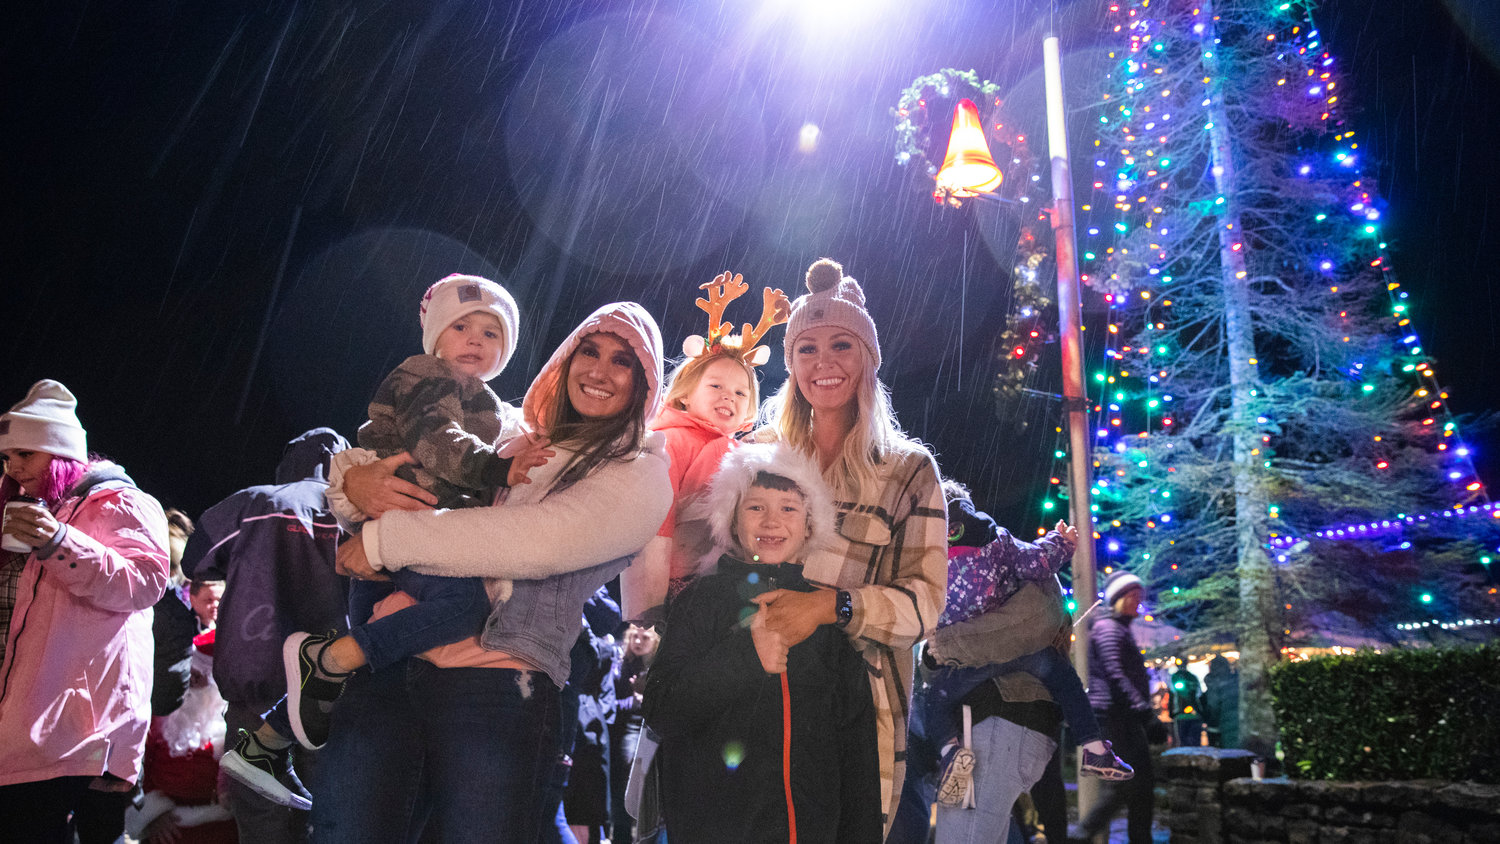 Members of the Jensen and Johnson families gather for a photo in front of the Christmas tree in downtown Tenino Friday night. It was the 35th annual Tenino Christmas Tree Lighting in the Stone City.  The event was brought to the community by the Tenino Area Chamber of Commerce.